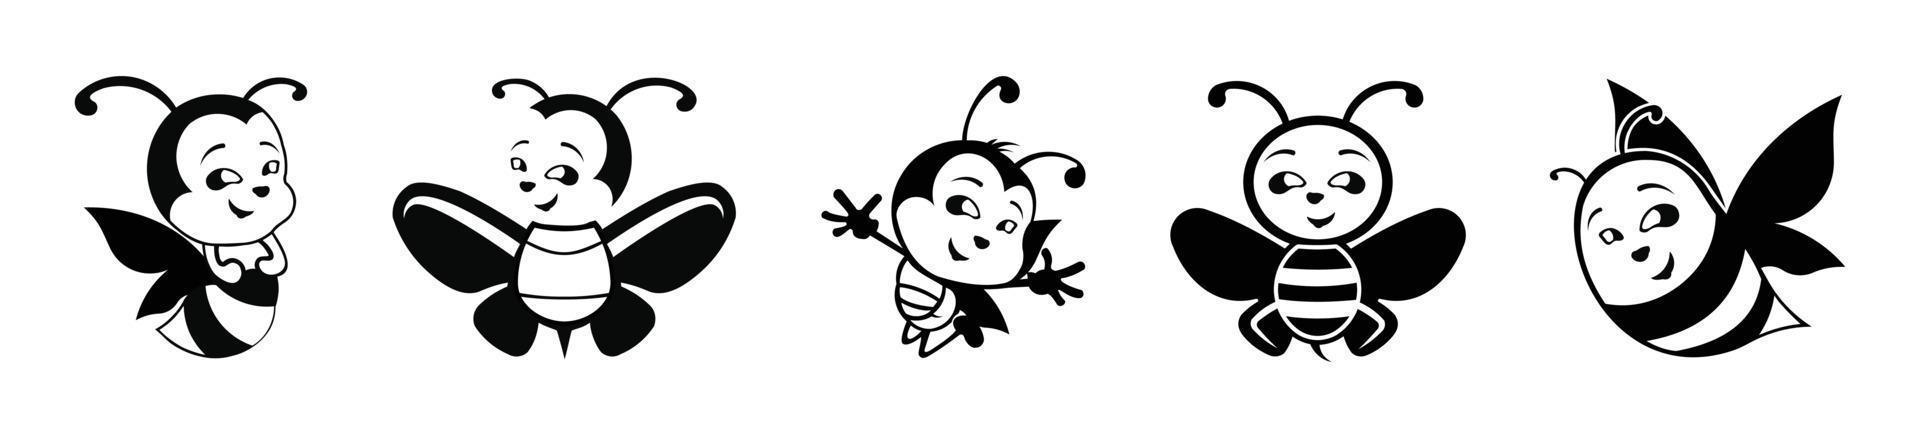 Honey bee cartoon  set Flat style vector illustration. Set of  honey and bee labels for honey logo products.